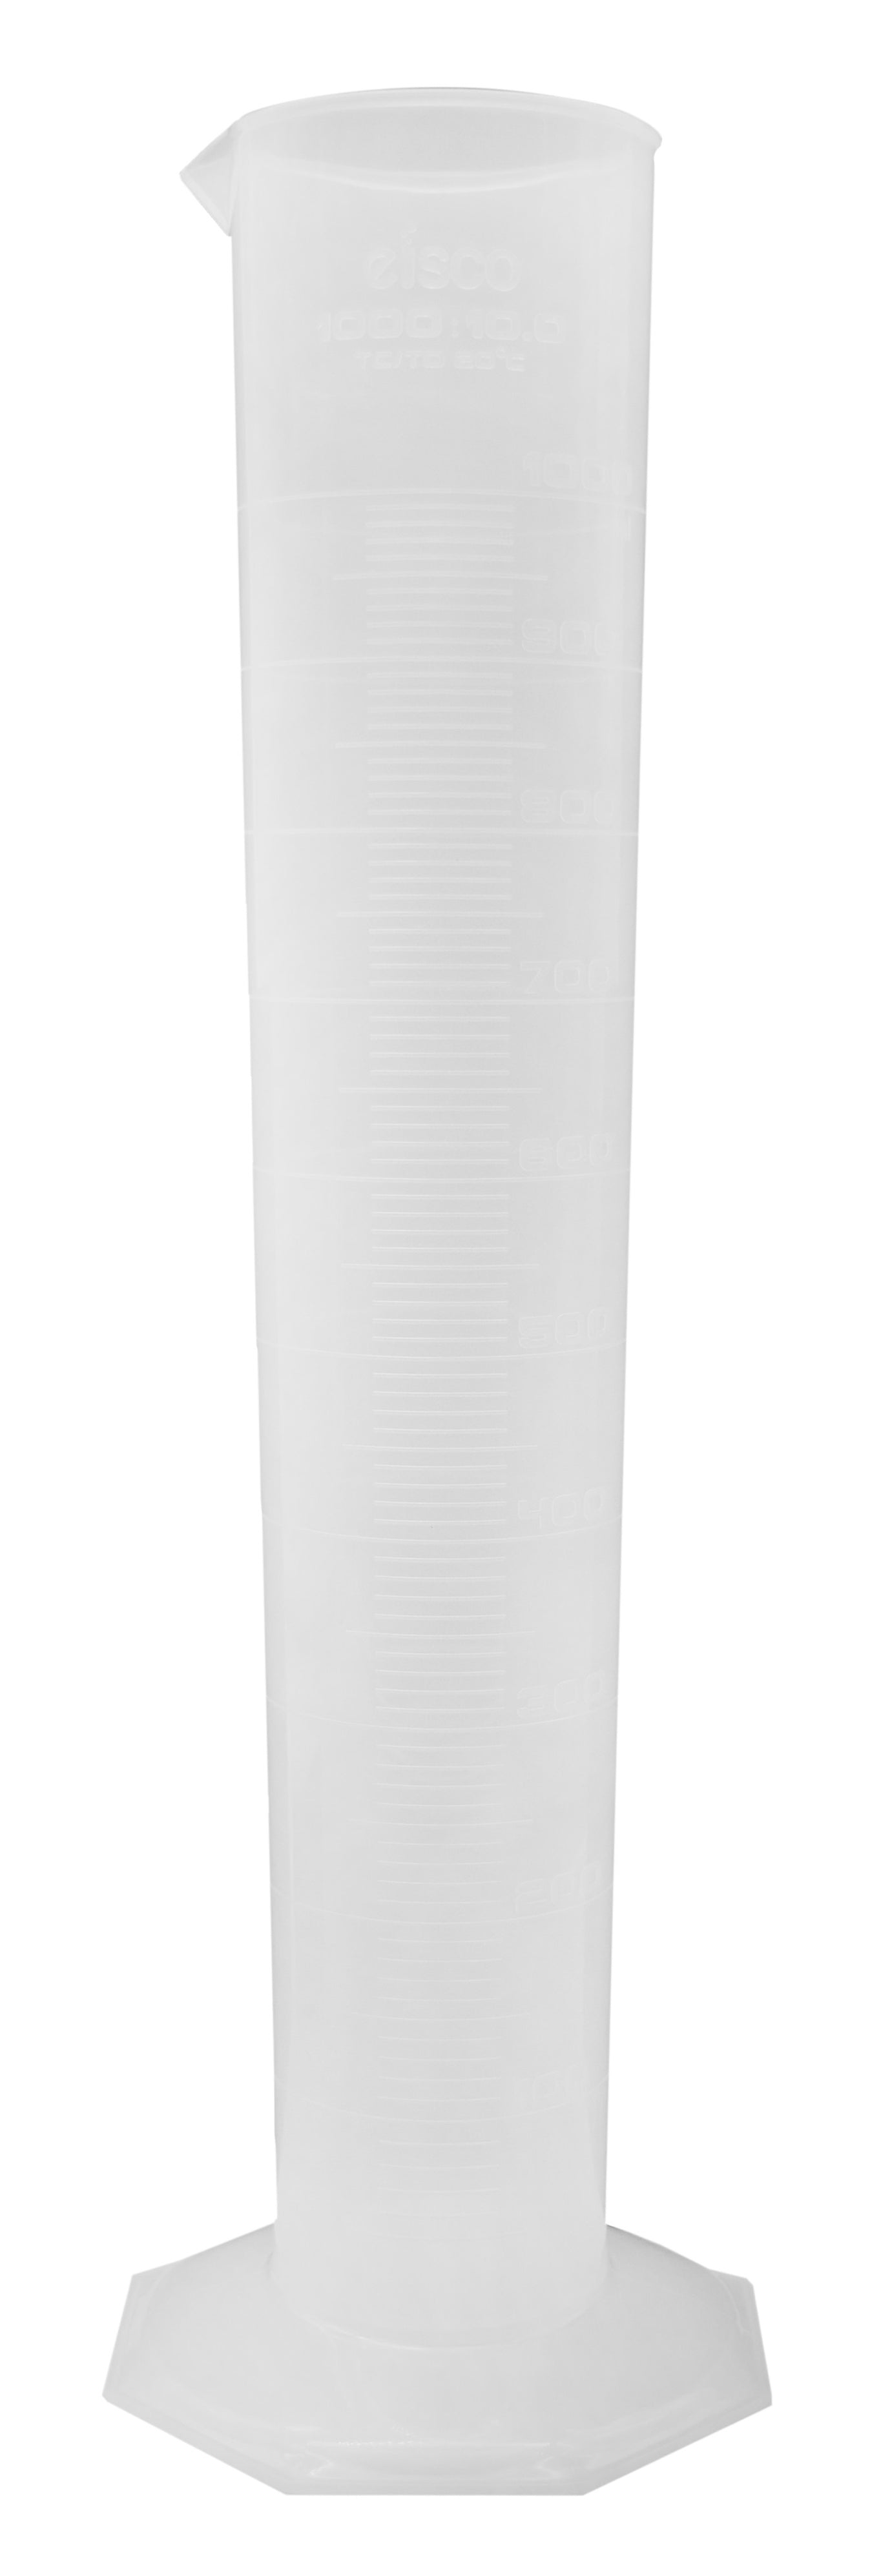 Measuring Cylinder 1000ml Class B — Eisco Labs 6046